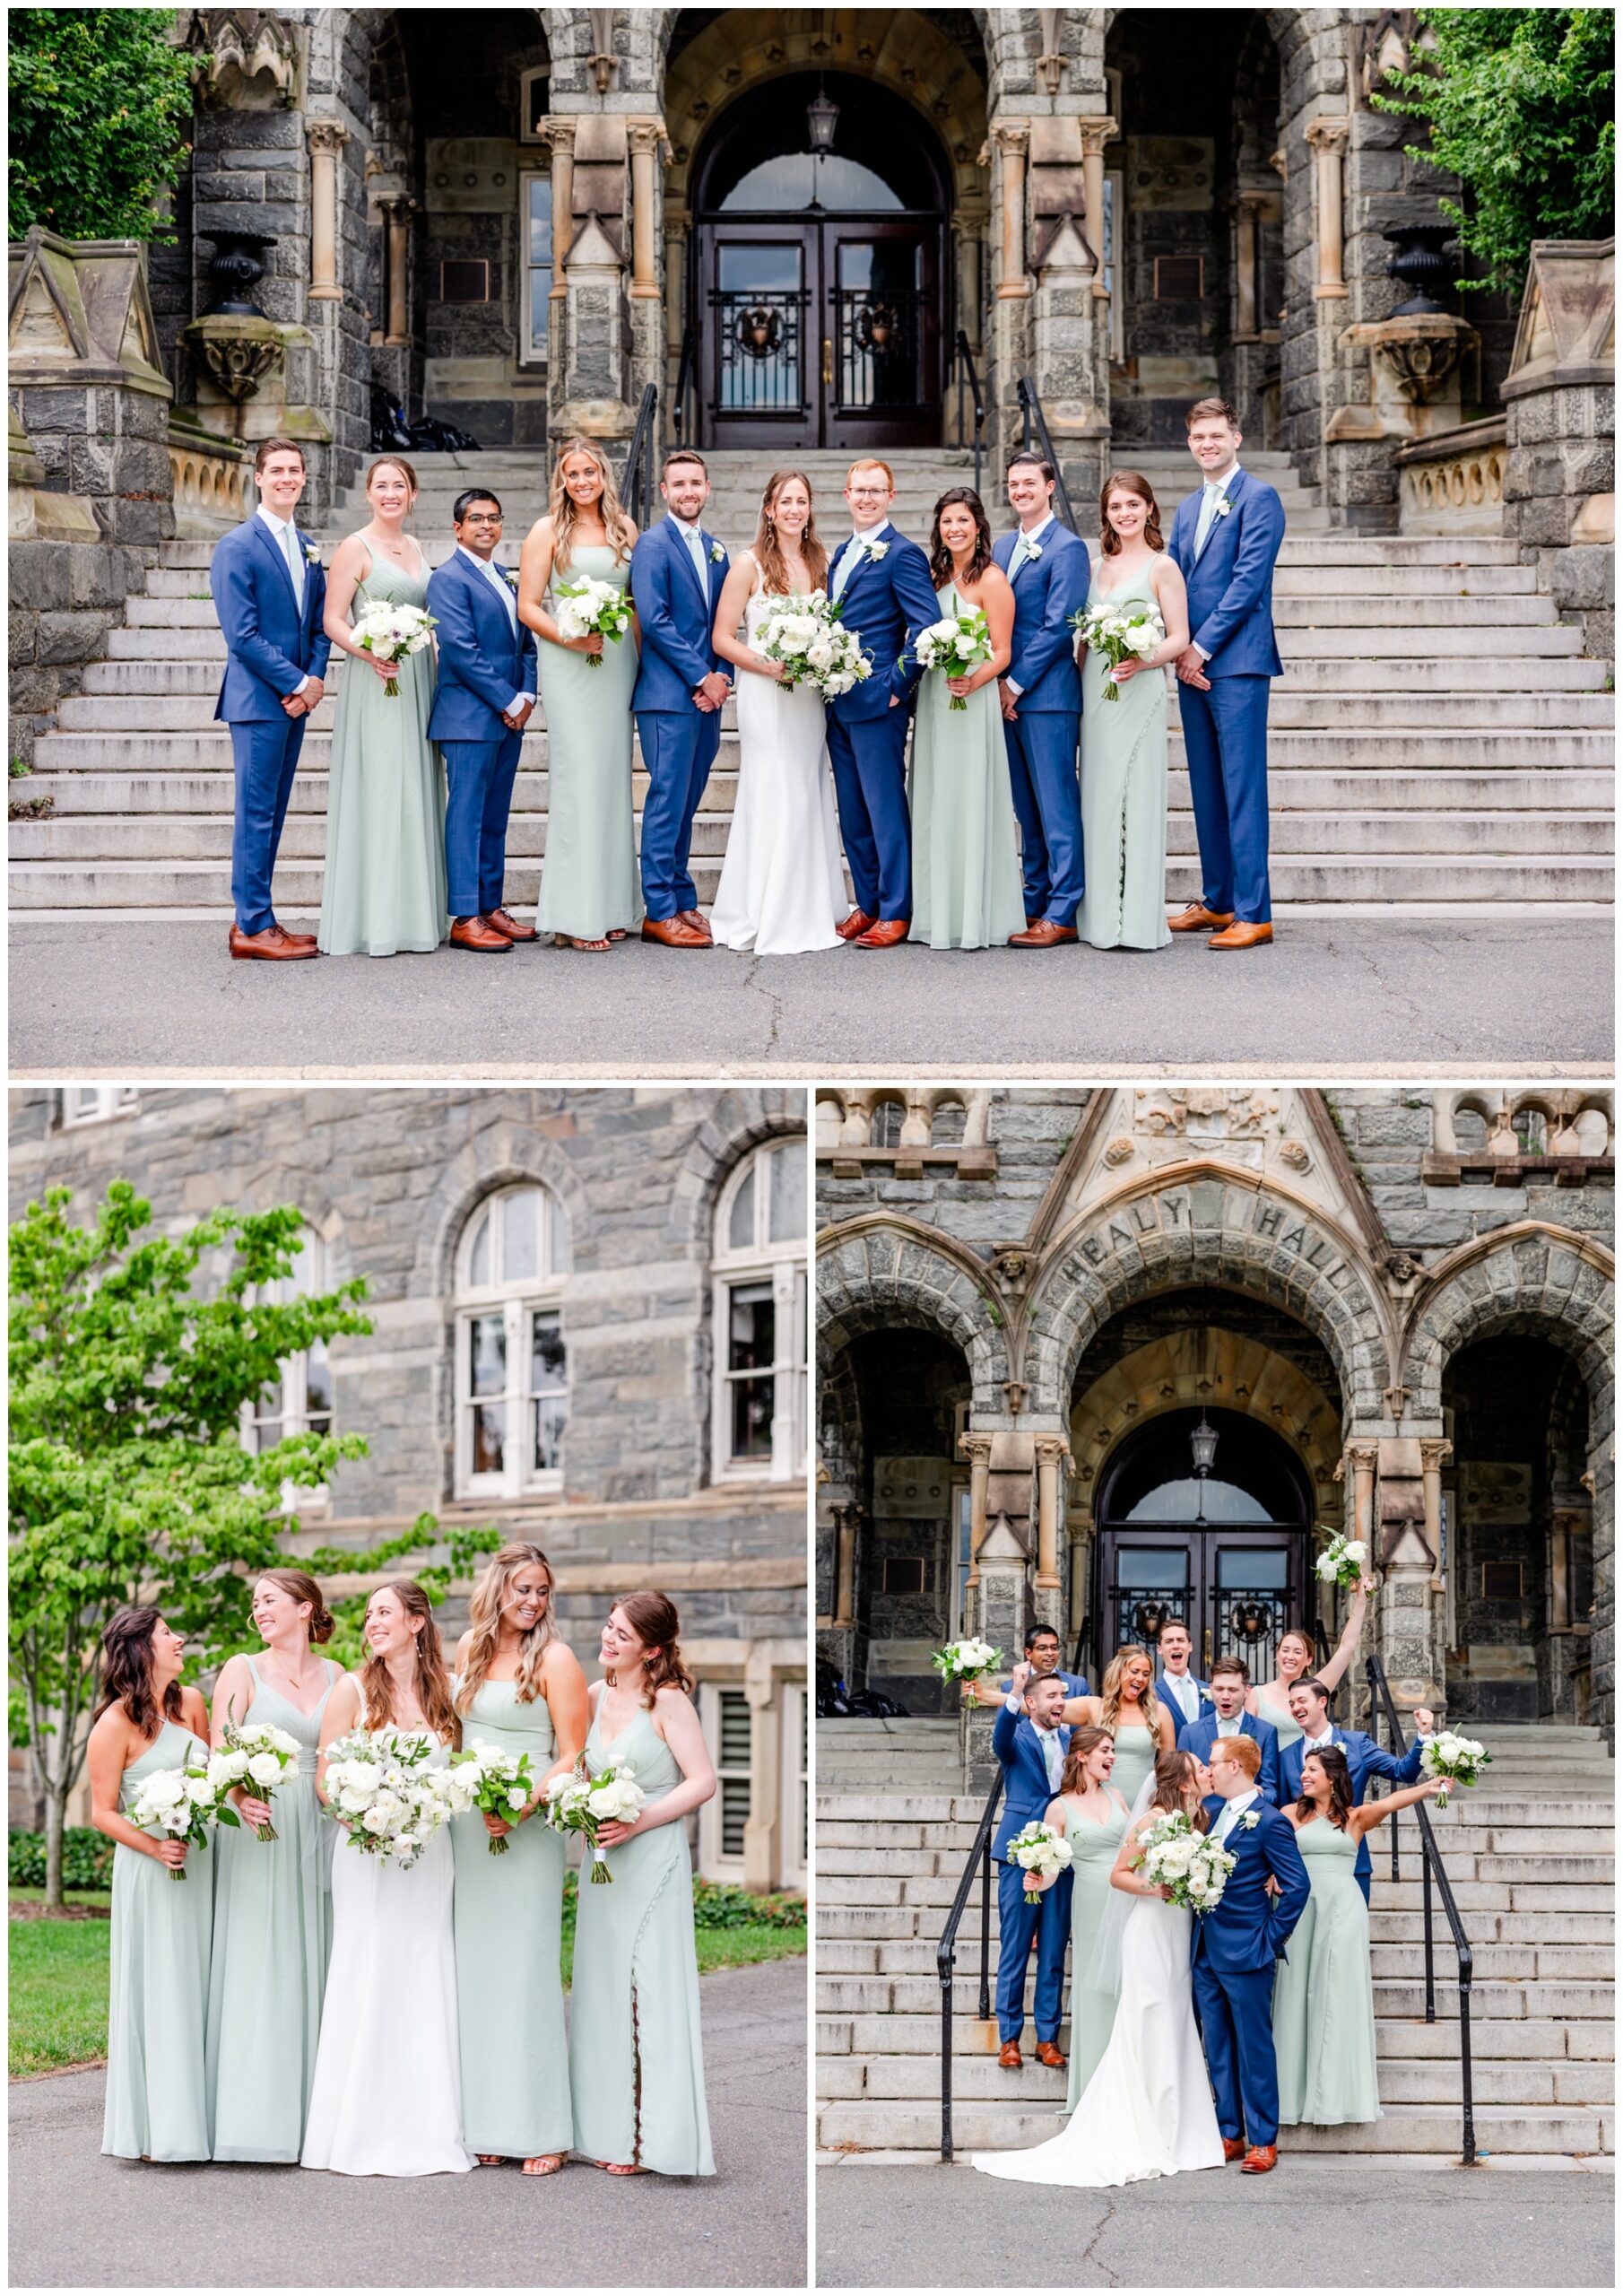 Washington D.C. summer wedding, Toolbox Washington D.C., Dupont Circle wedding venue, summer wedding aesthetic, summer wedding portraits, sage green aesthetic, Washington D.C. wedding photography, D.C. wedding photographer, Rachel E.H. Photography, Georgetown University portraits, Georgetown portraits, bride and groom standing with wedding party, bride smiling at bridesmaids 